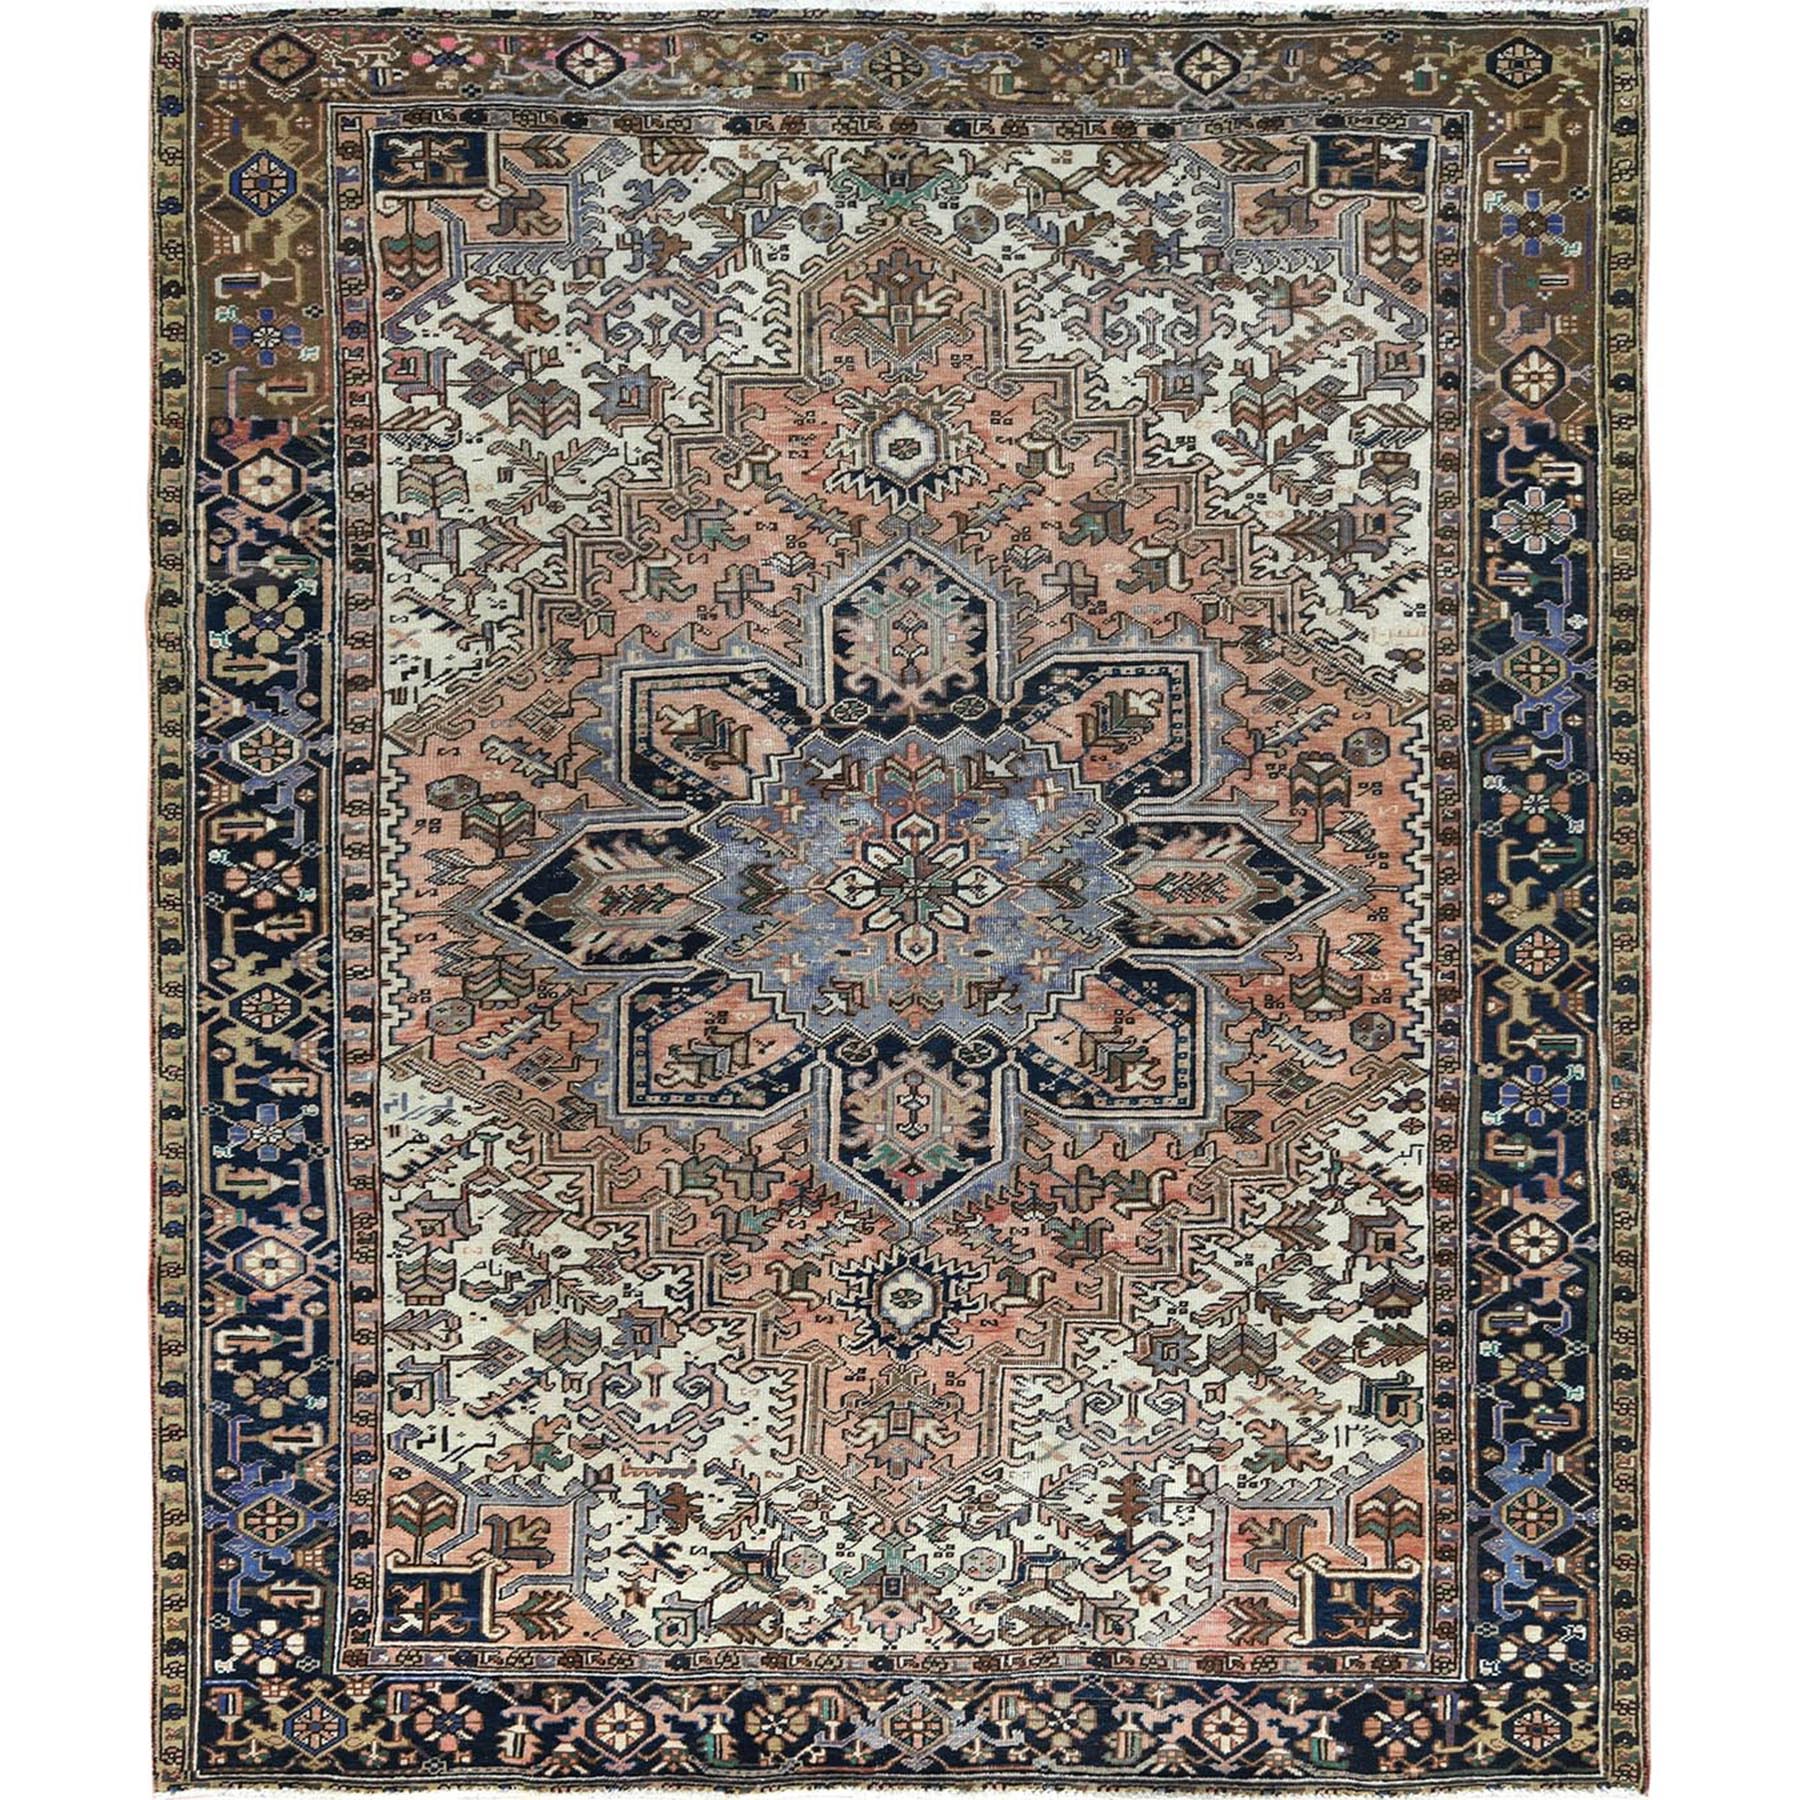  Wool Hand-Knotted Area Rug 8'3